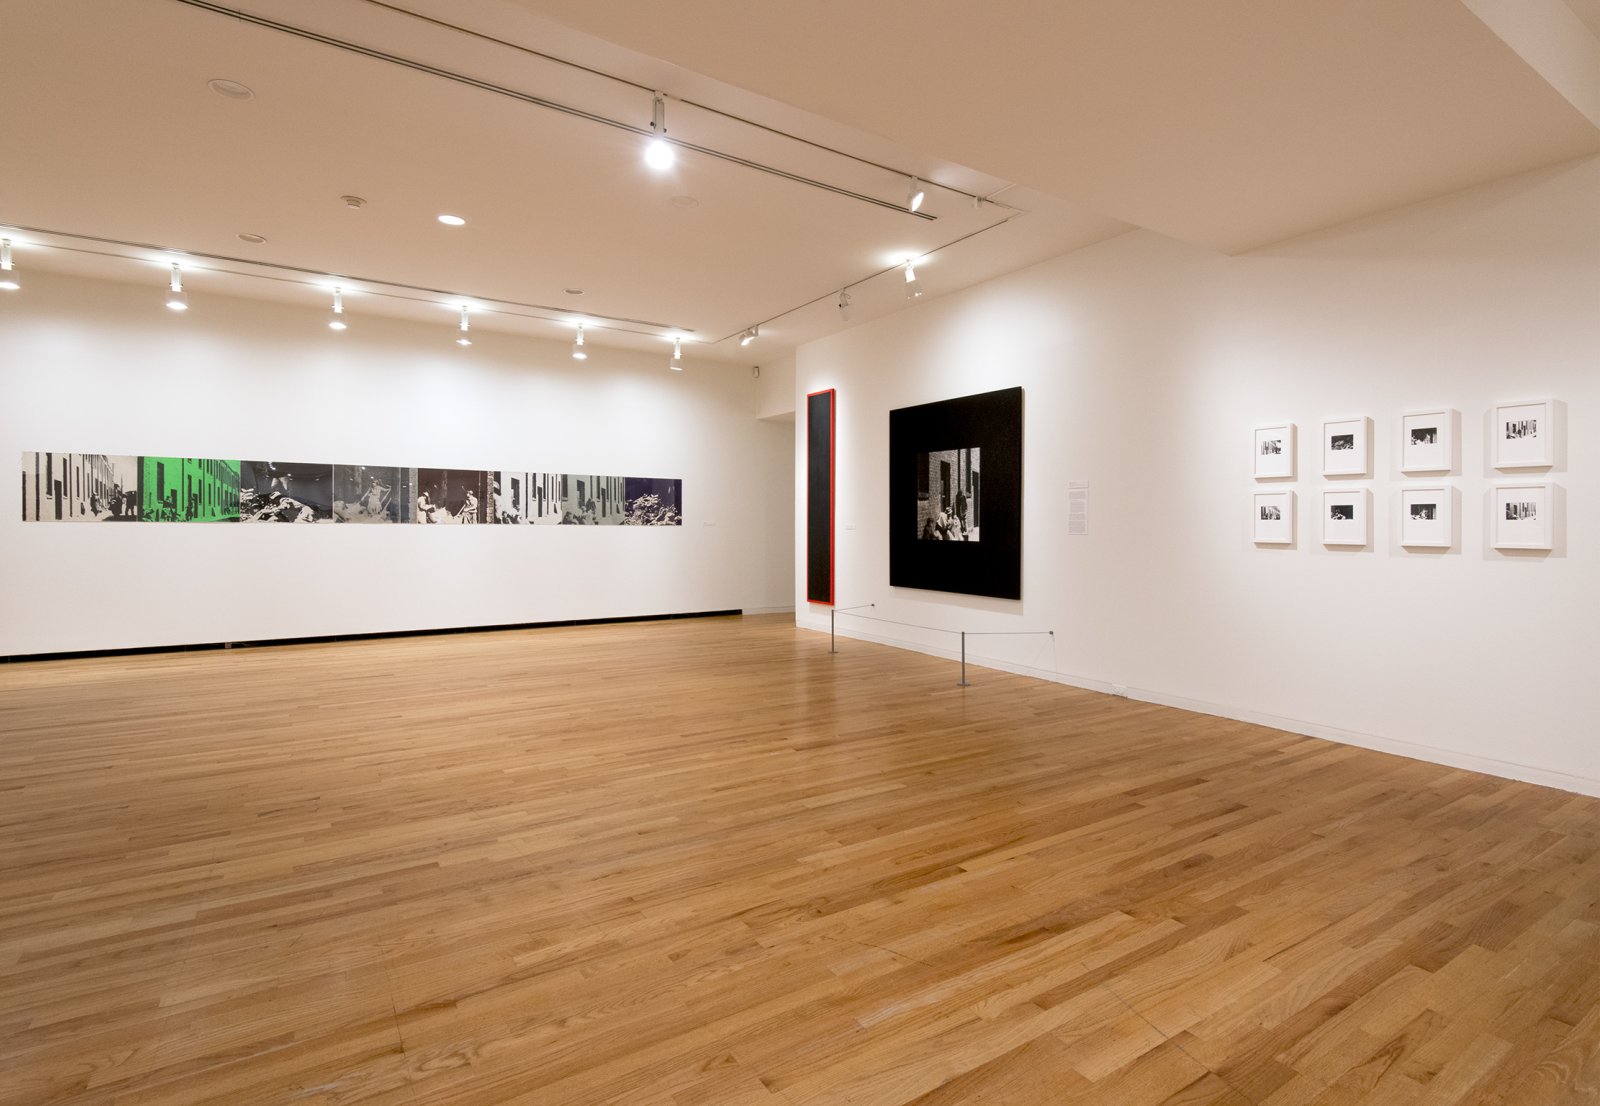 ​Ian Wallace, installation view, A Literature of Images, Vancouver Art Gallery, 2012​ by Ian Wallace